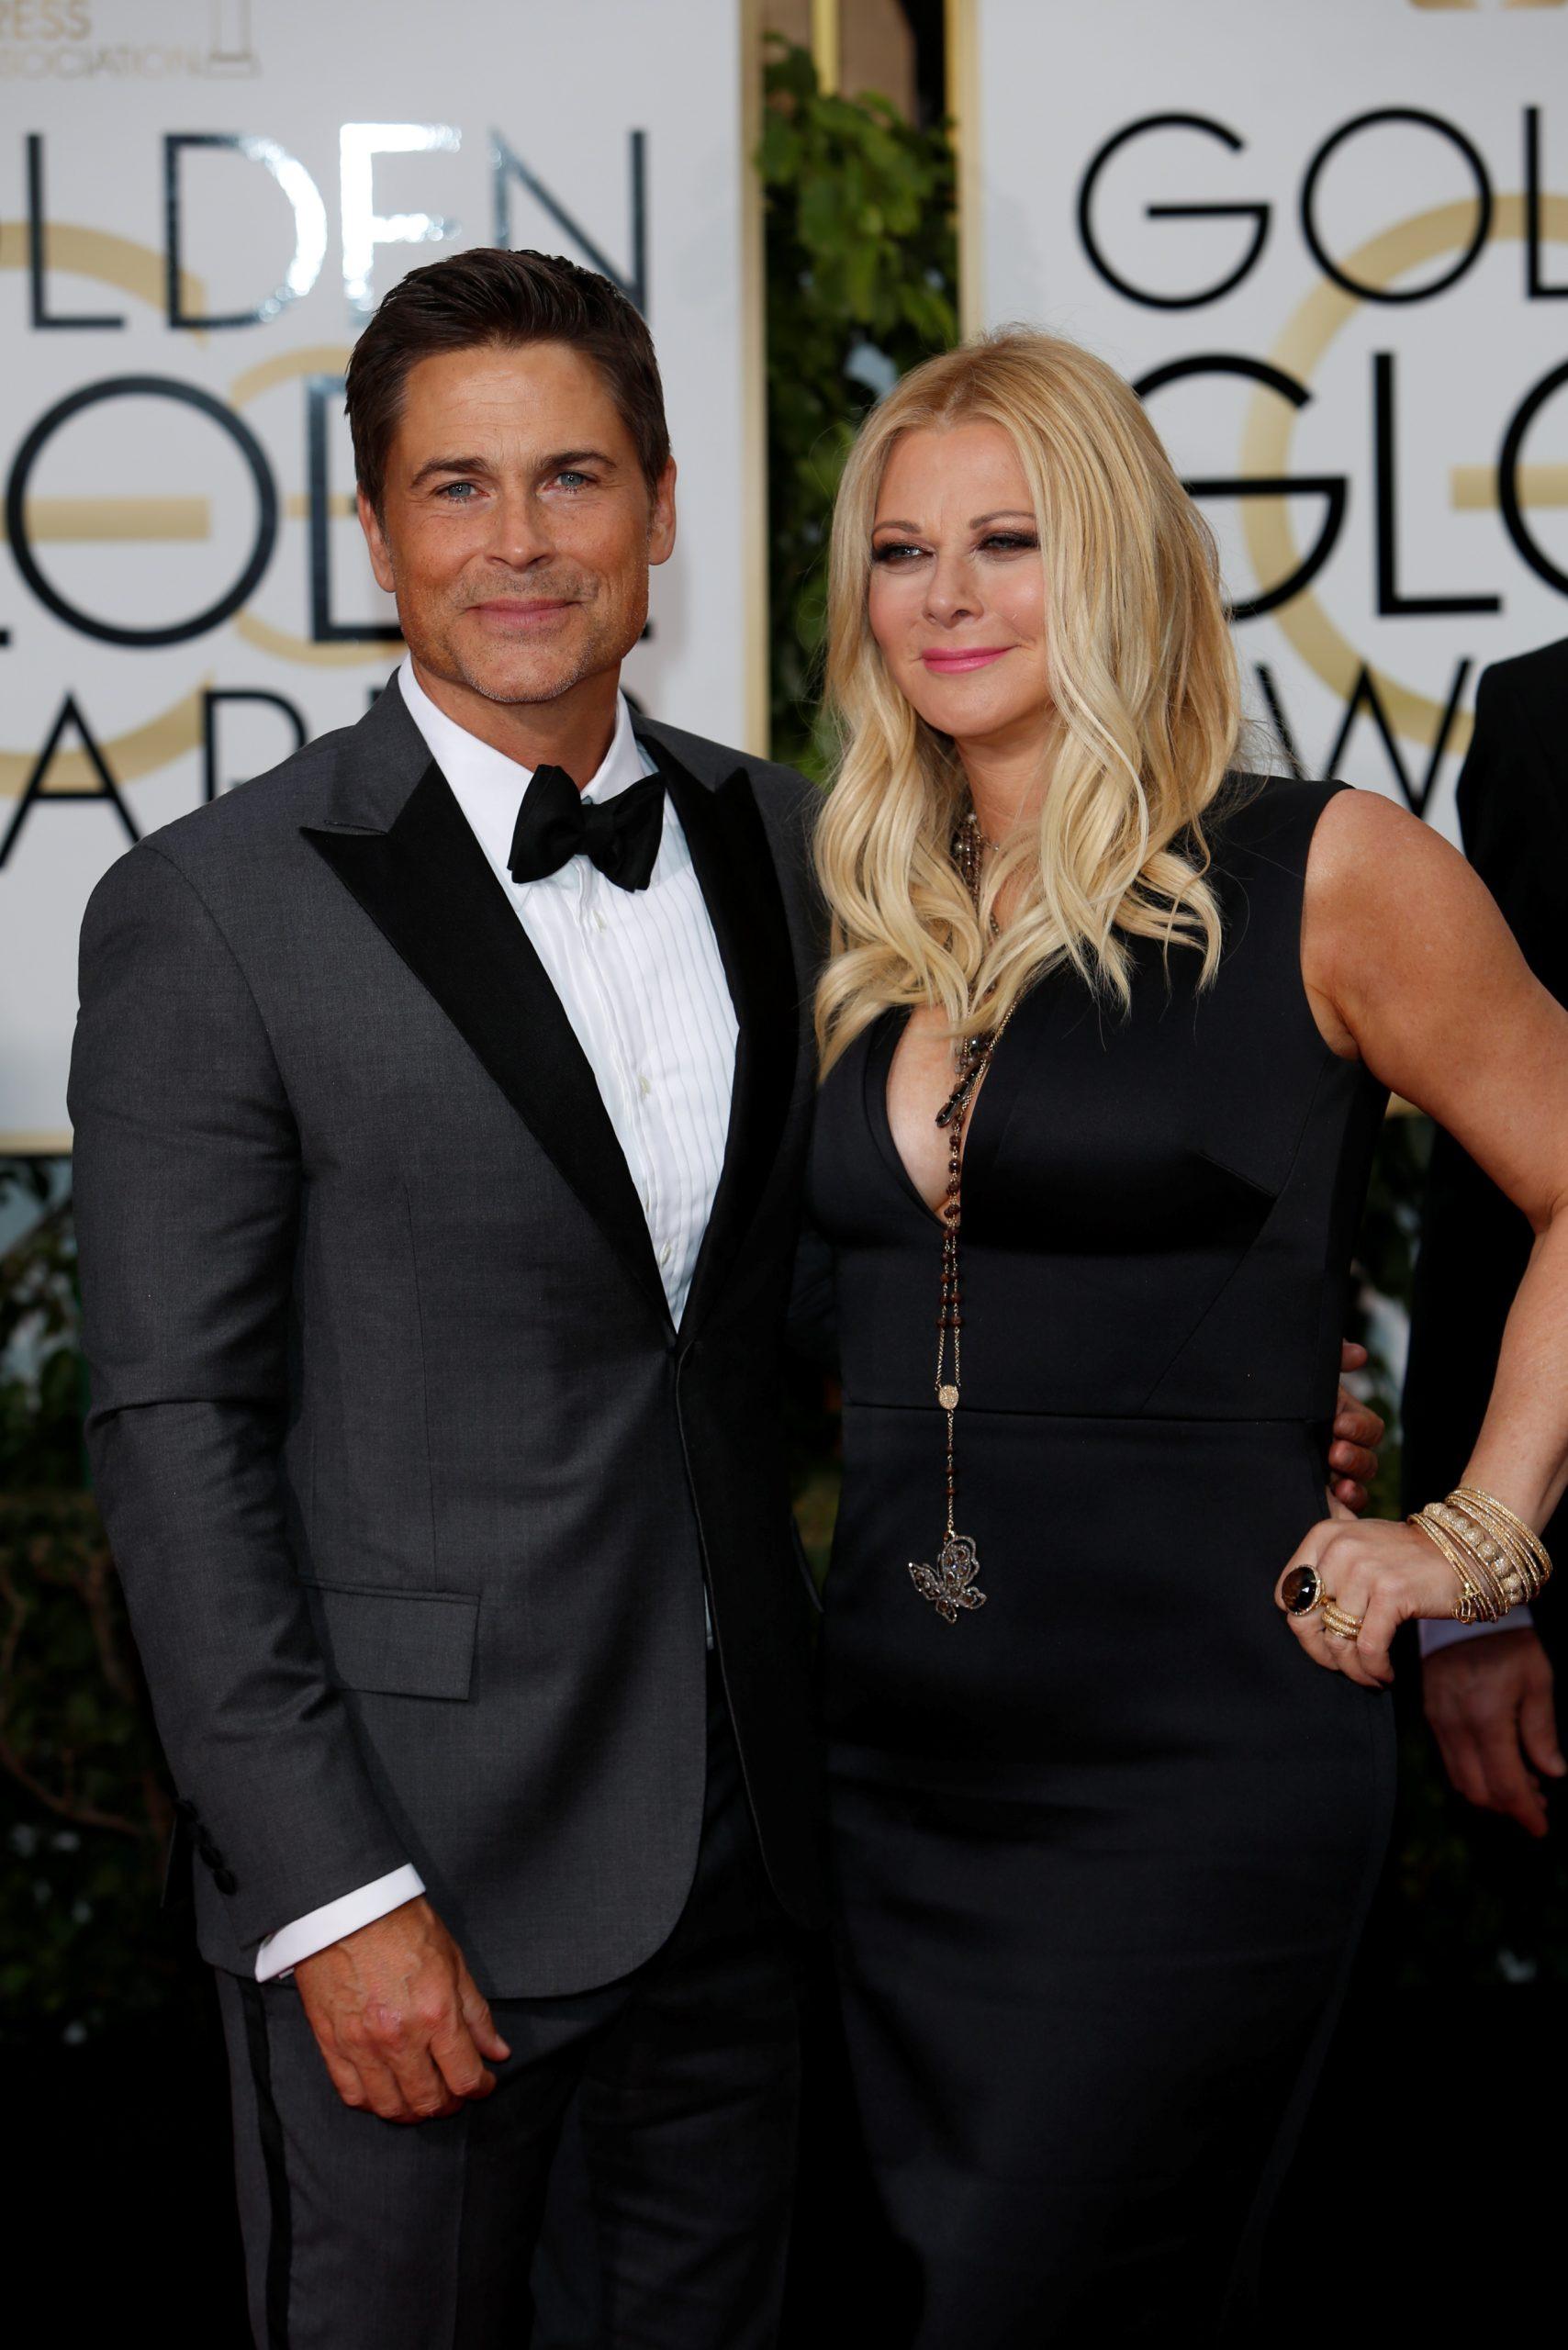 Rob Lowe Reveals Secrets To His Long-Lasting Marriage To Sheryl Berkoff: 'You Gotta Keep The Heat'